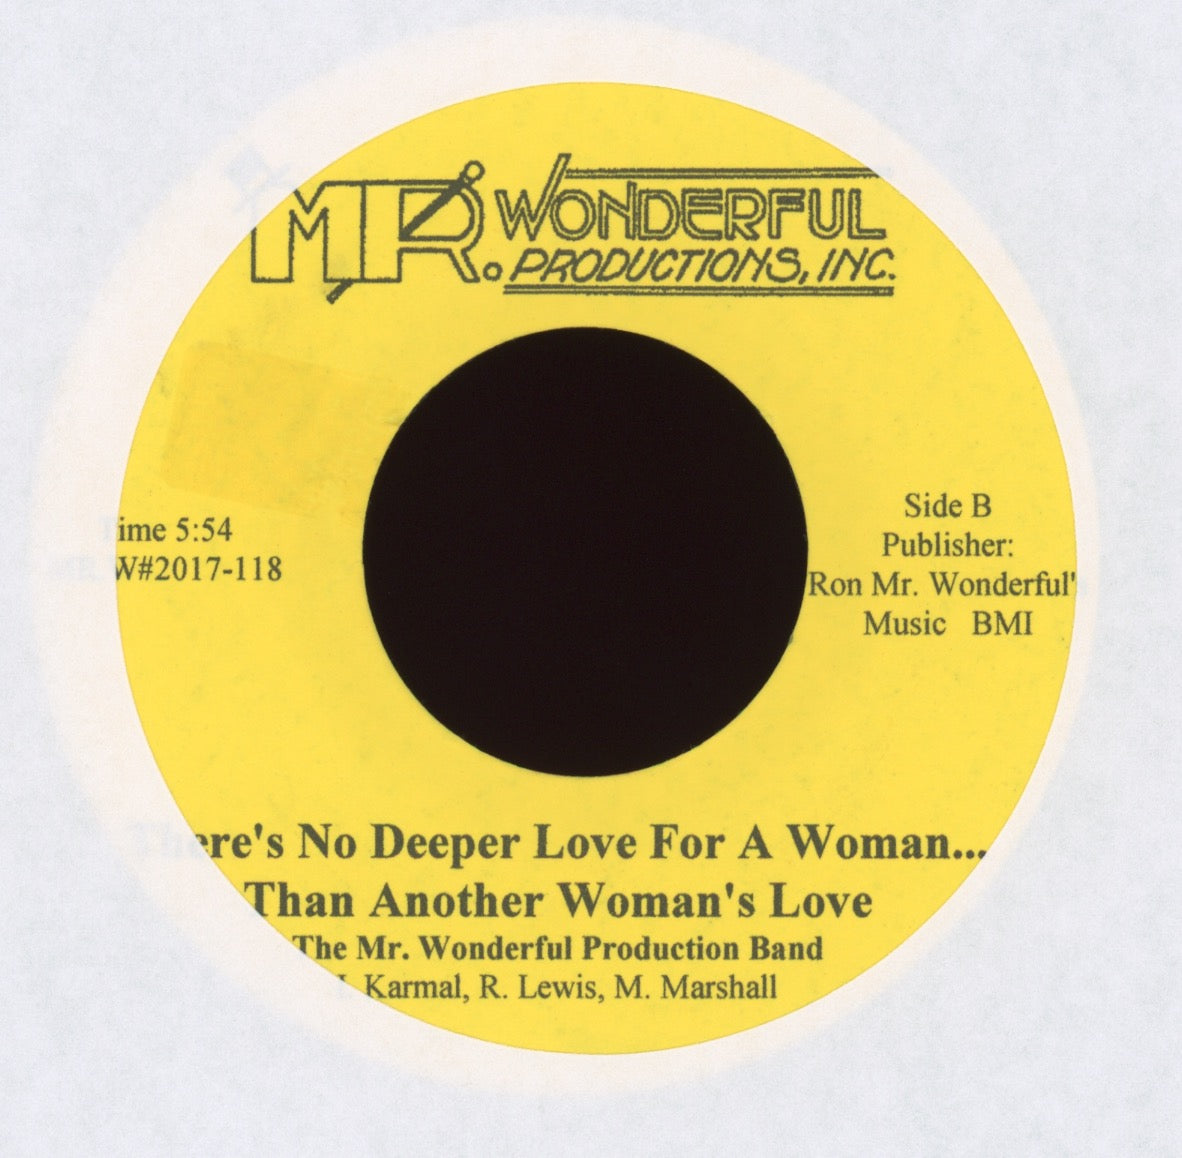 Mr. Wonderful Production Band - Theres No Deeper Love For A Woman...Than Another Woman's Love on Mr. Wonderful